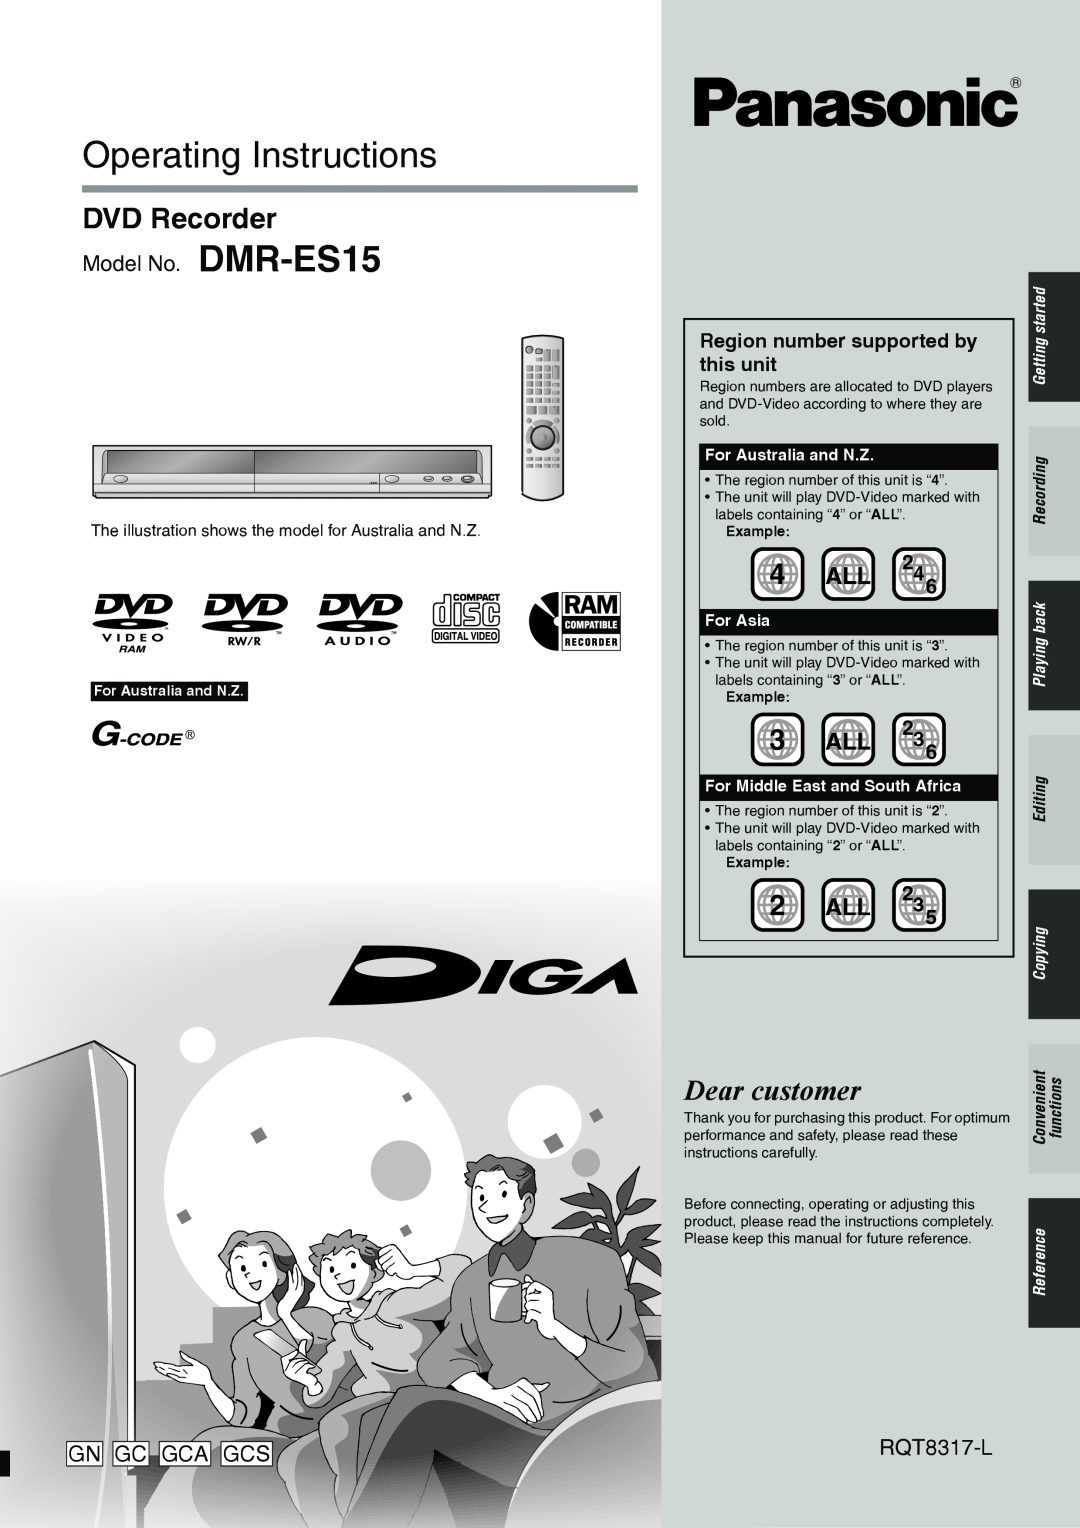 Panasonic DMR-ES15 manual Operating Instructions, DVD Recorder, Dear customer, Region number supported by, this unit 